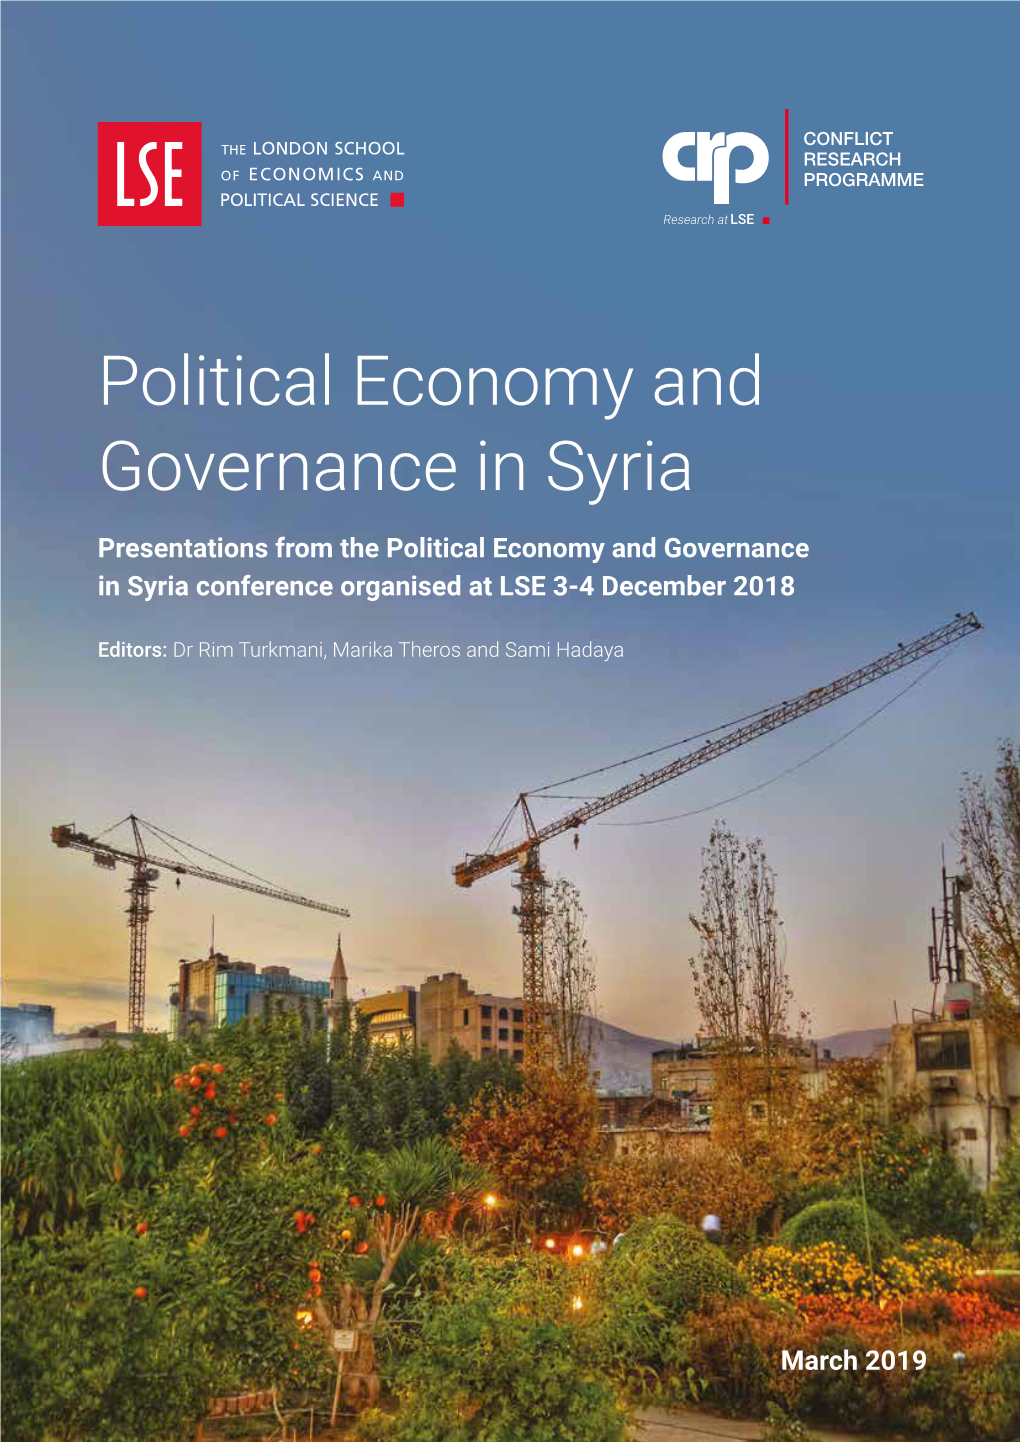 Political Economy and Governance in Syria